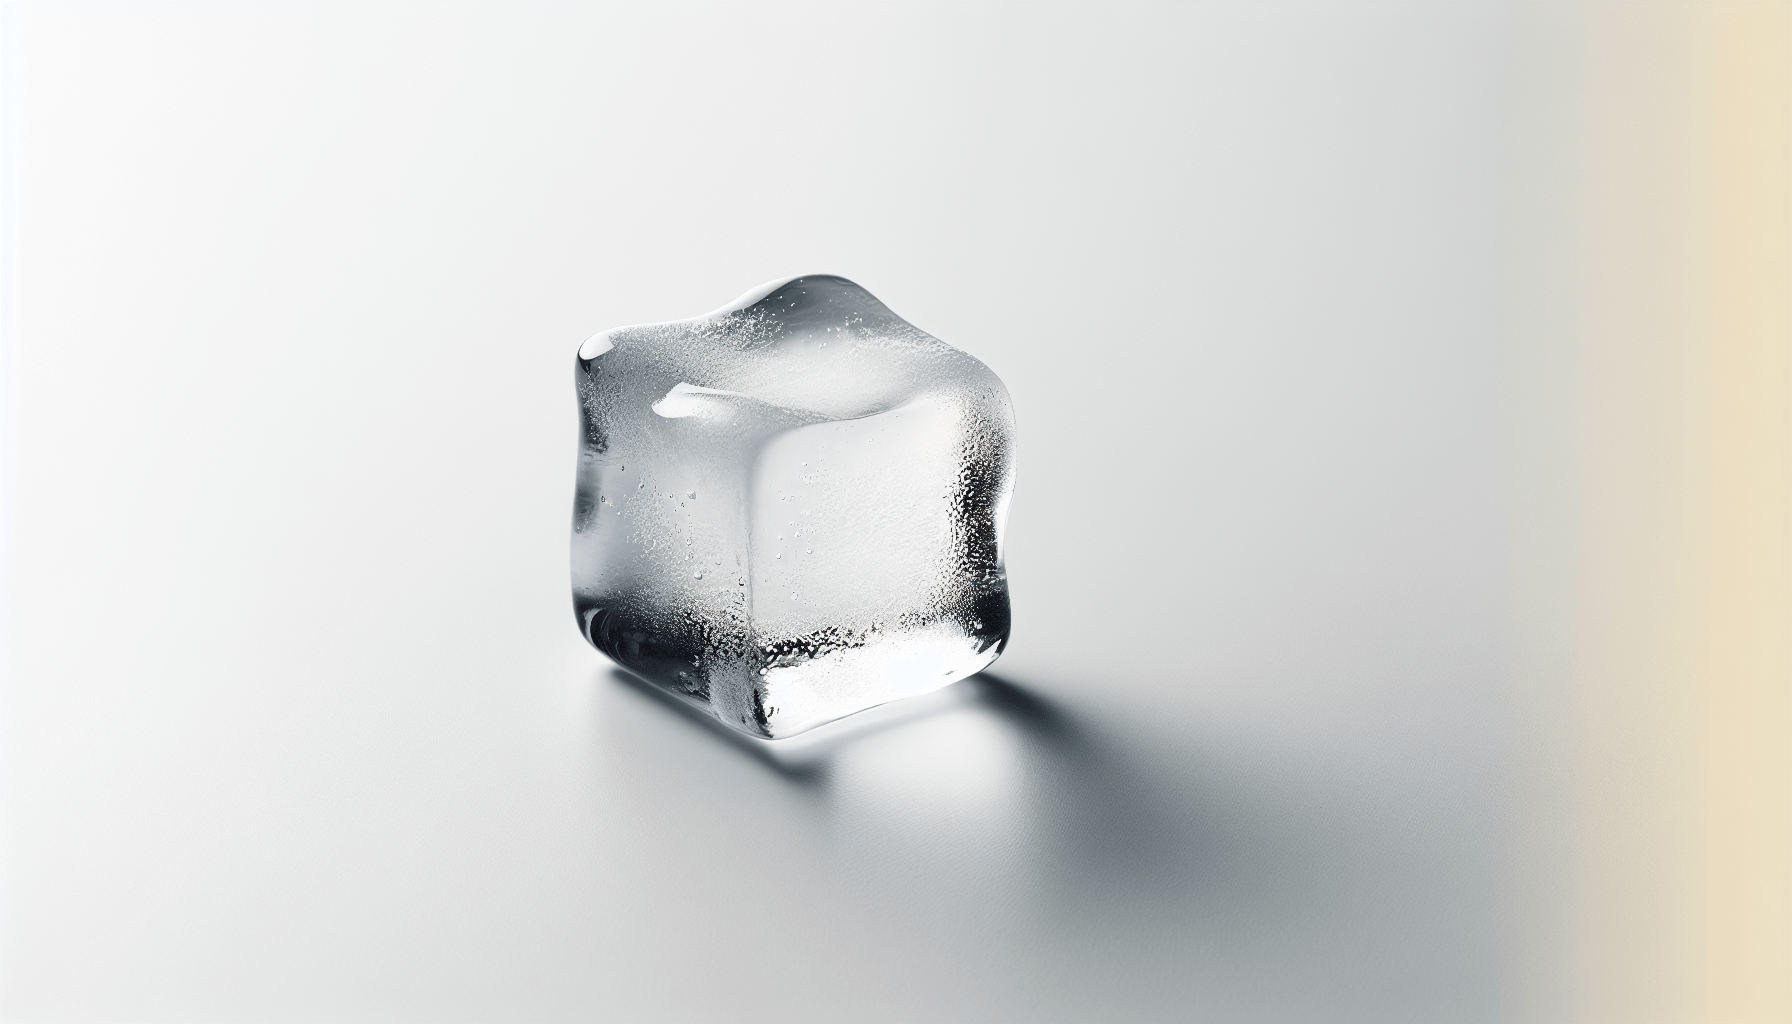 How Long Should I Put Ice On My Pimple?